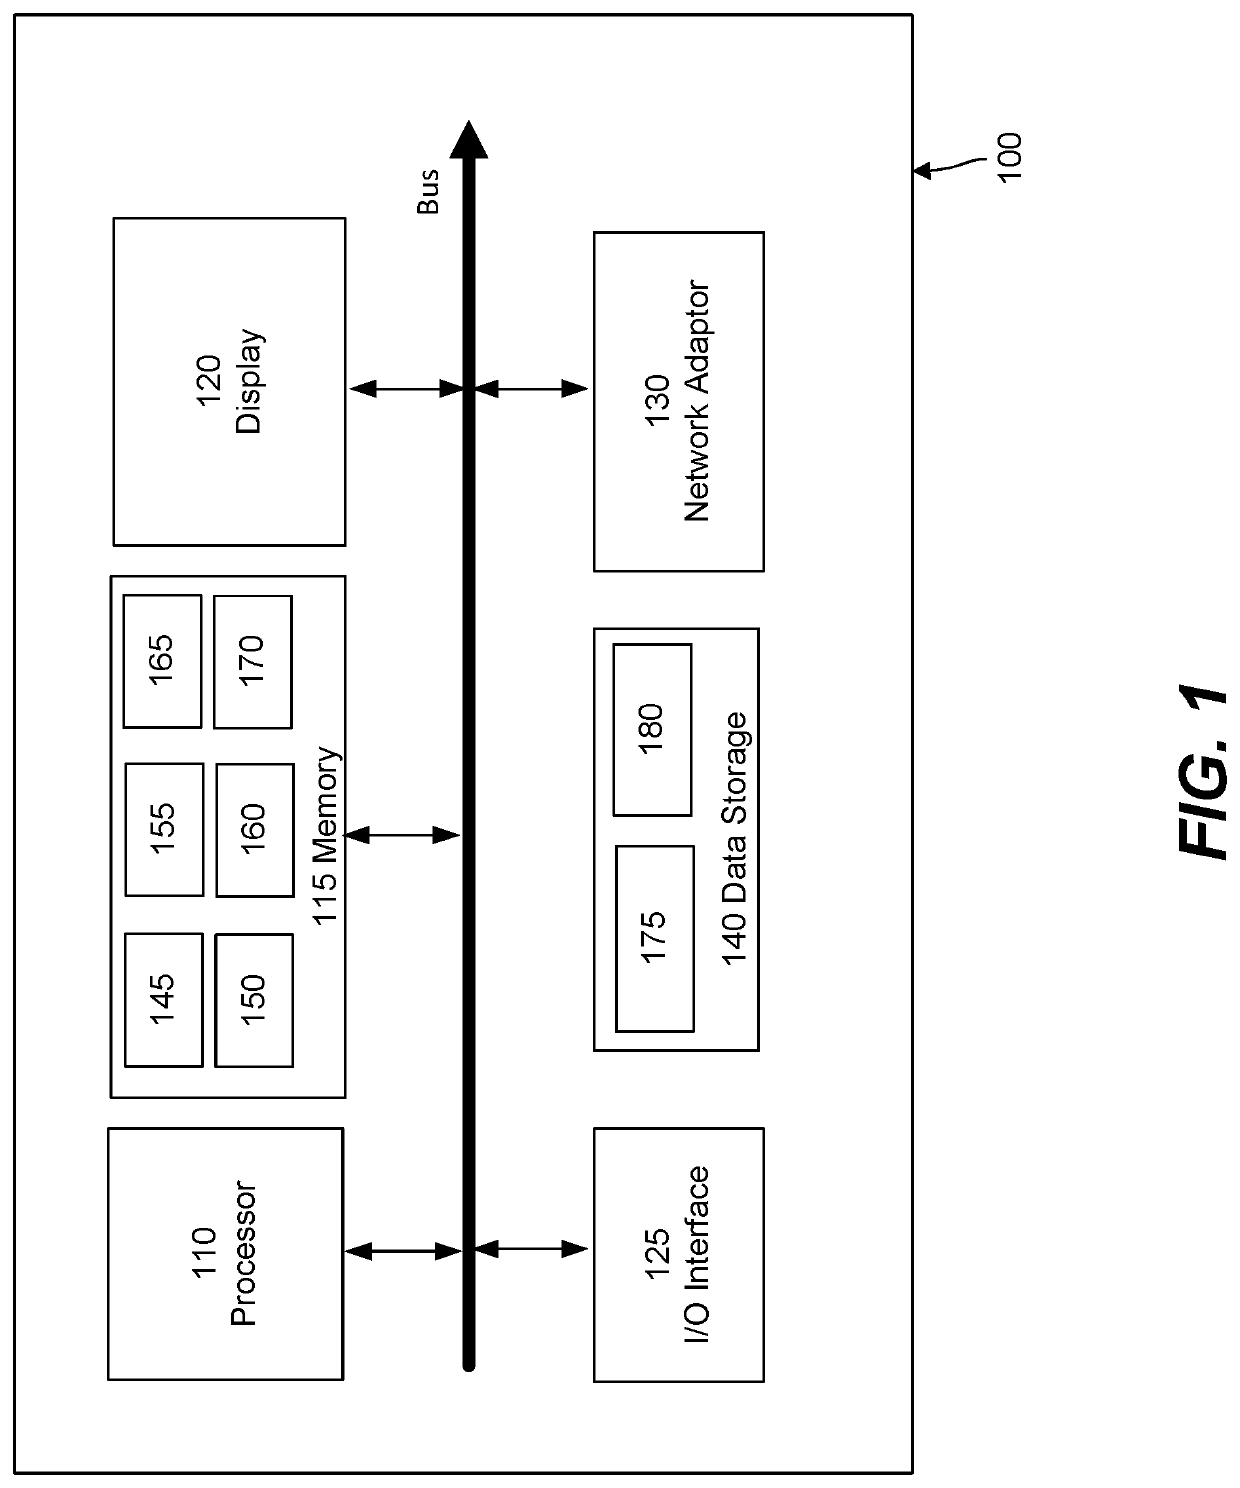 Systems and methods for selecting and utilizing a committee of validator nodes in a distributed system